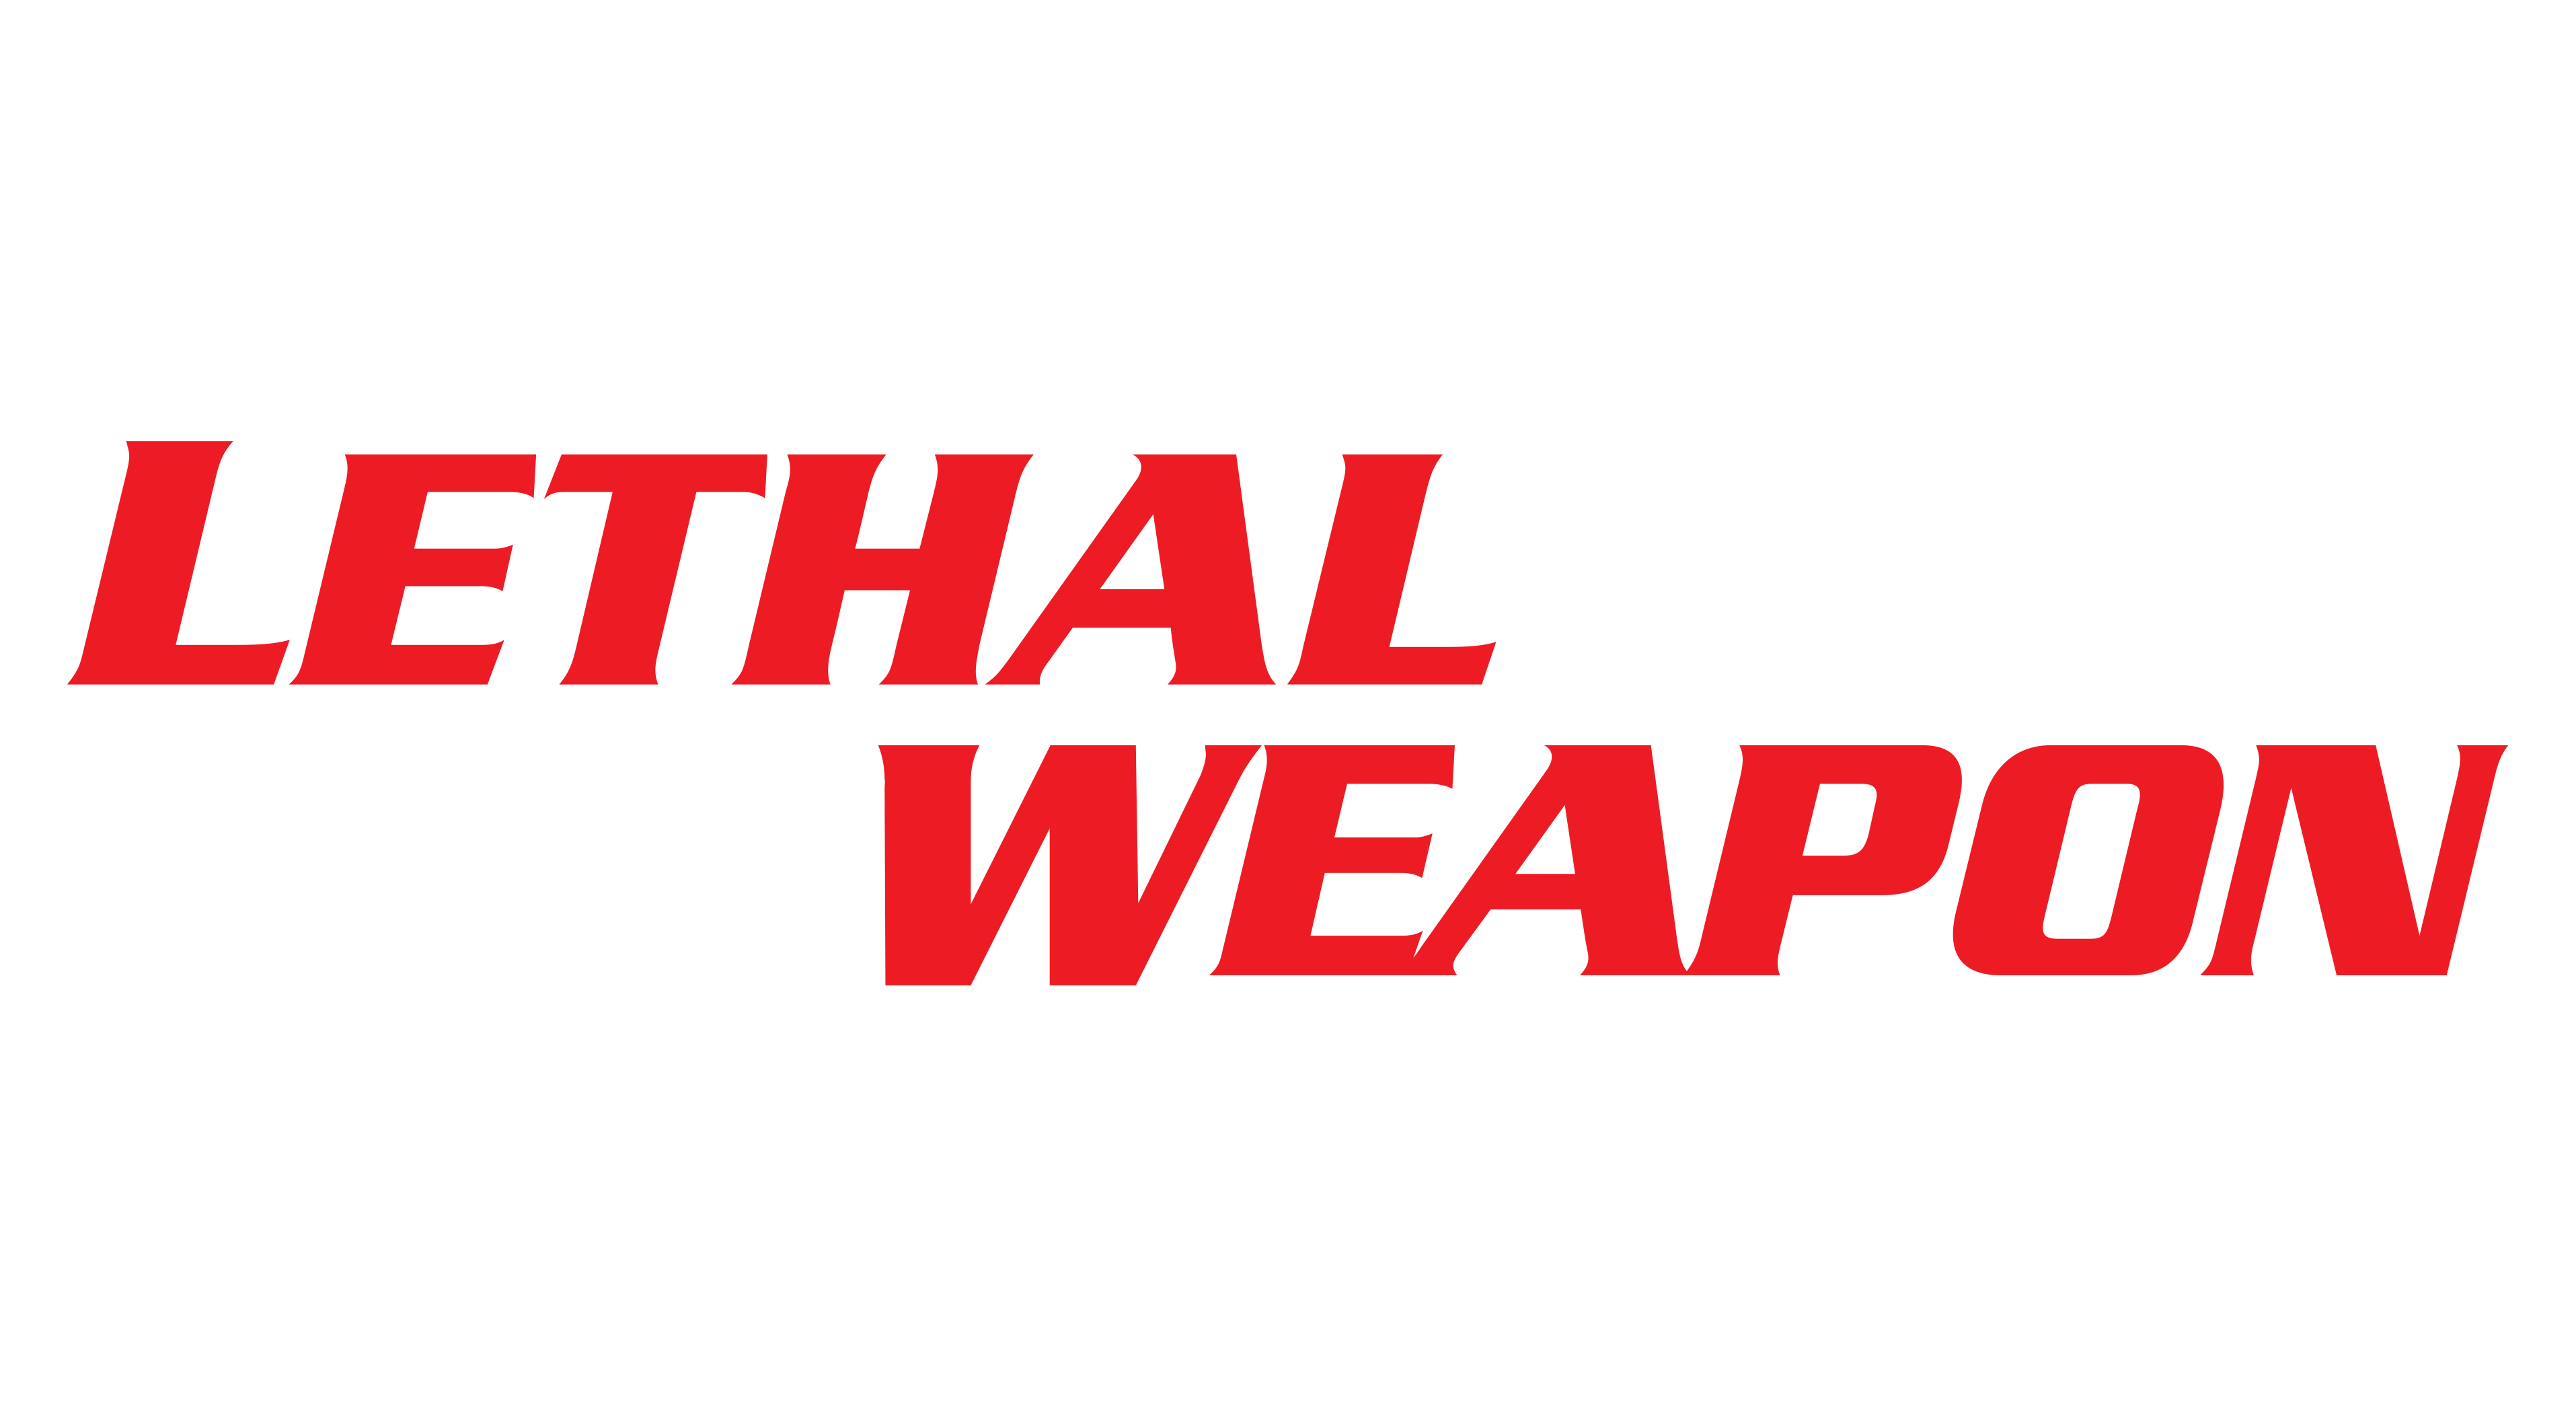 Lethal company stickers. Lethal Weapon. Lethal Weapon logo. Lethal Company лого. Super Nintendo logo.